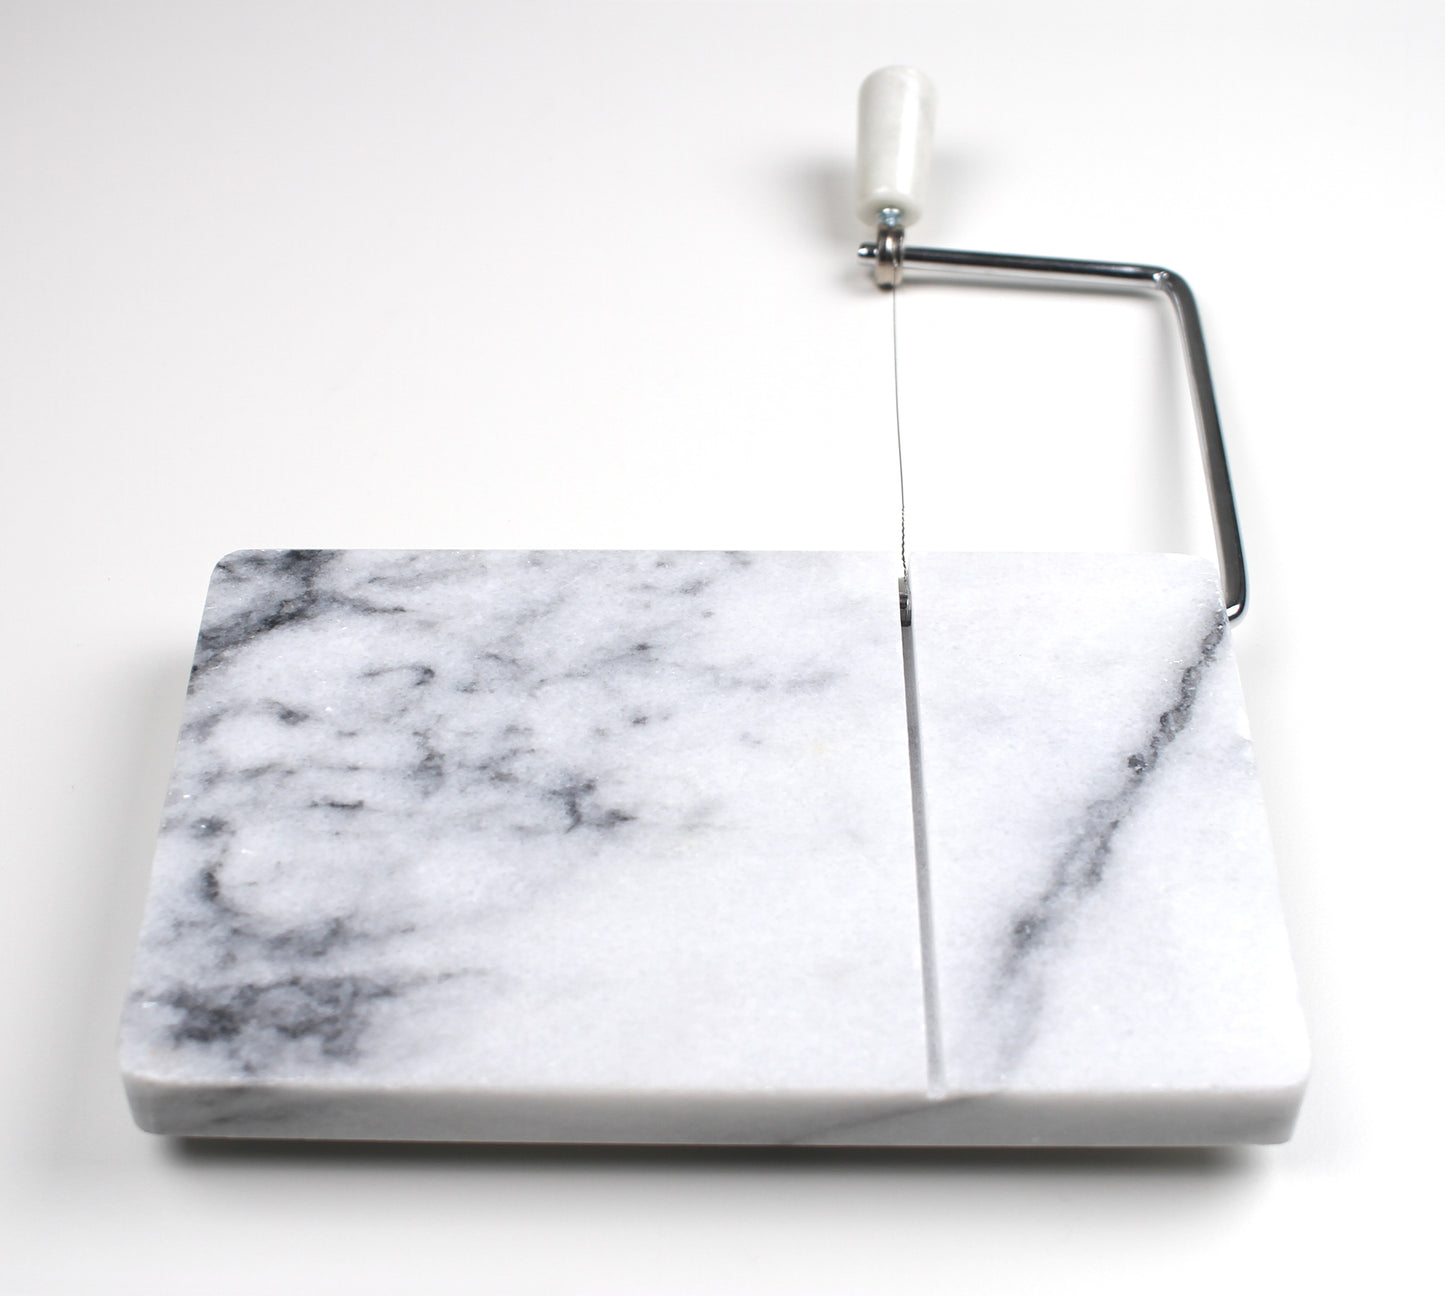 marble cheese slicer with handle lifted.